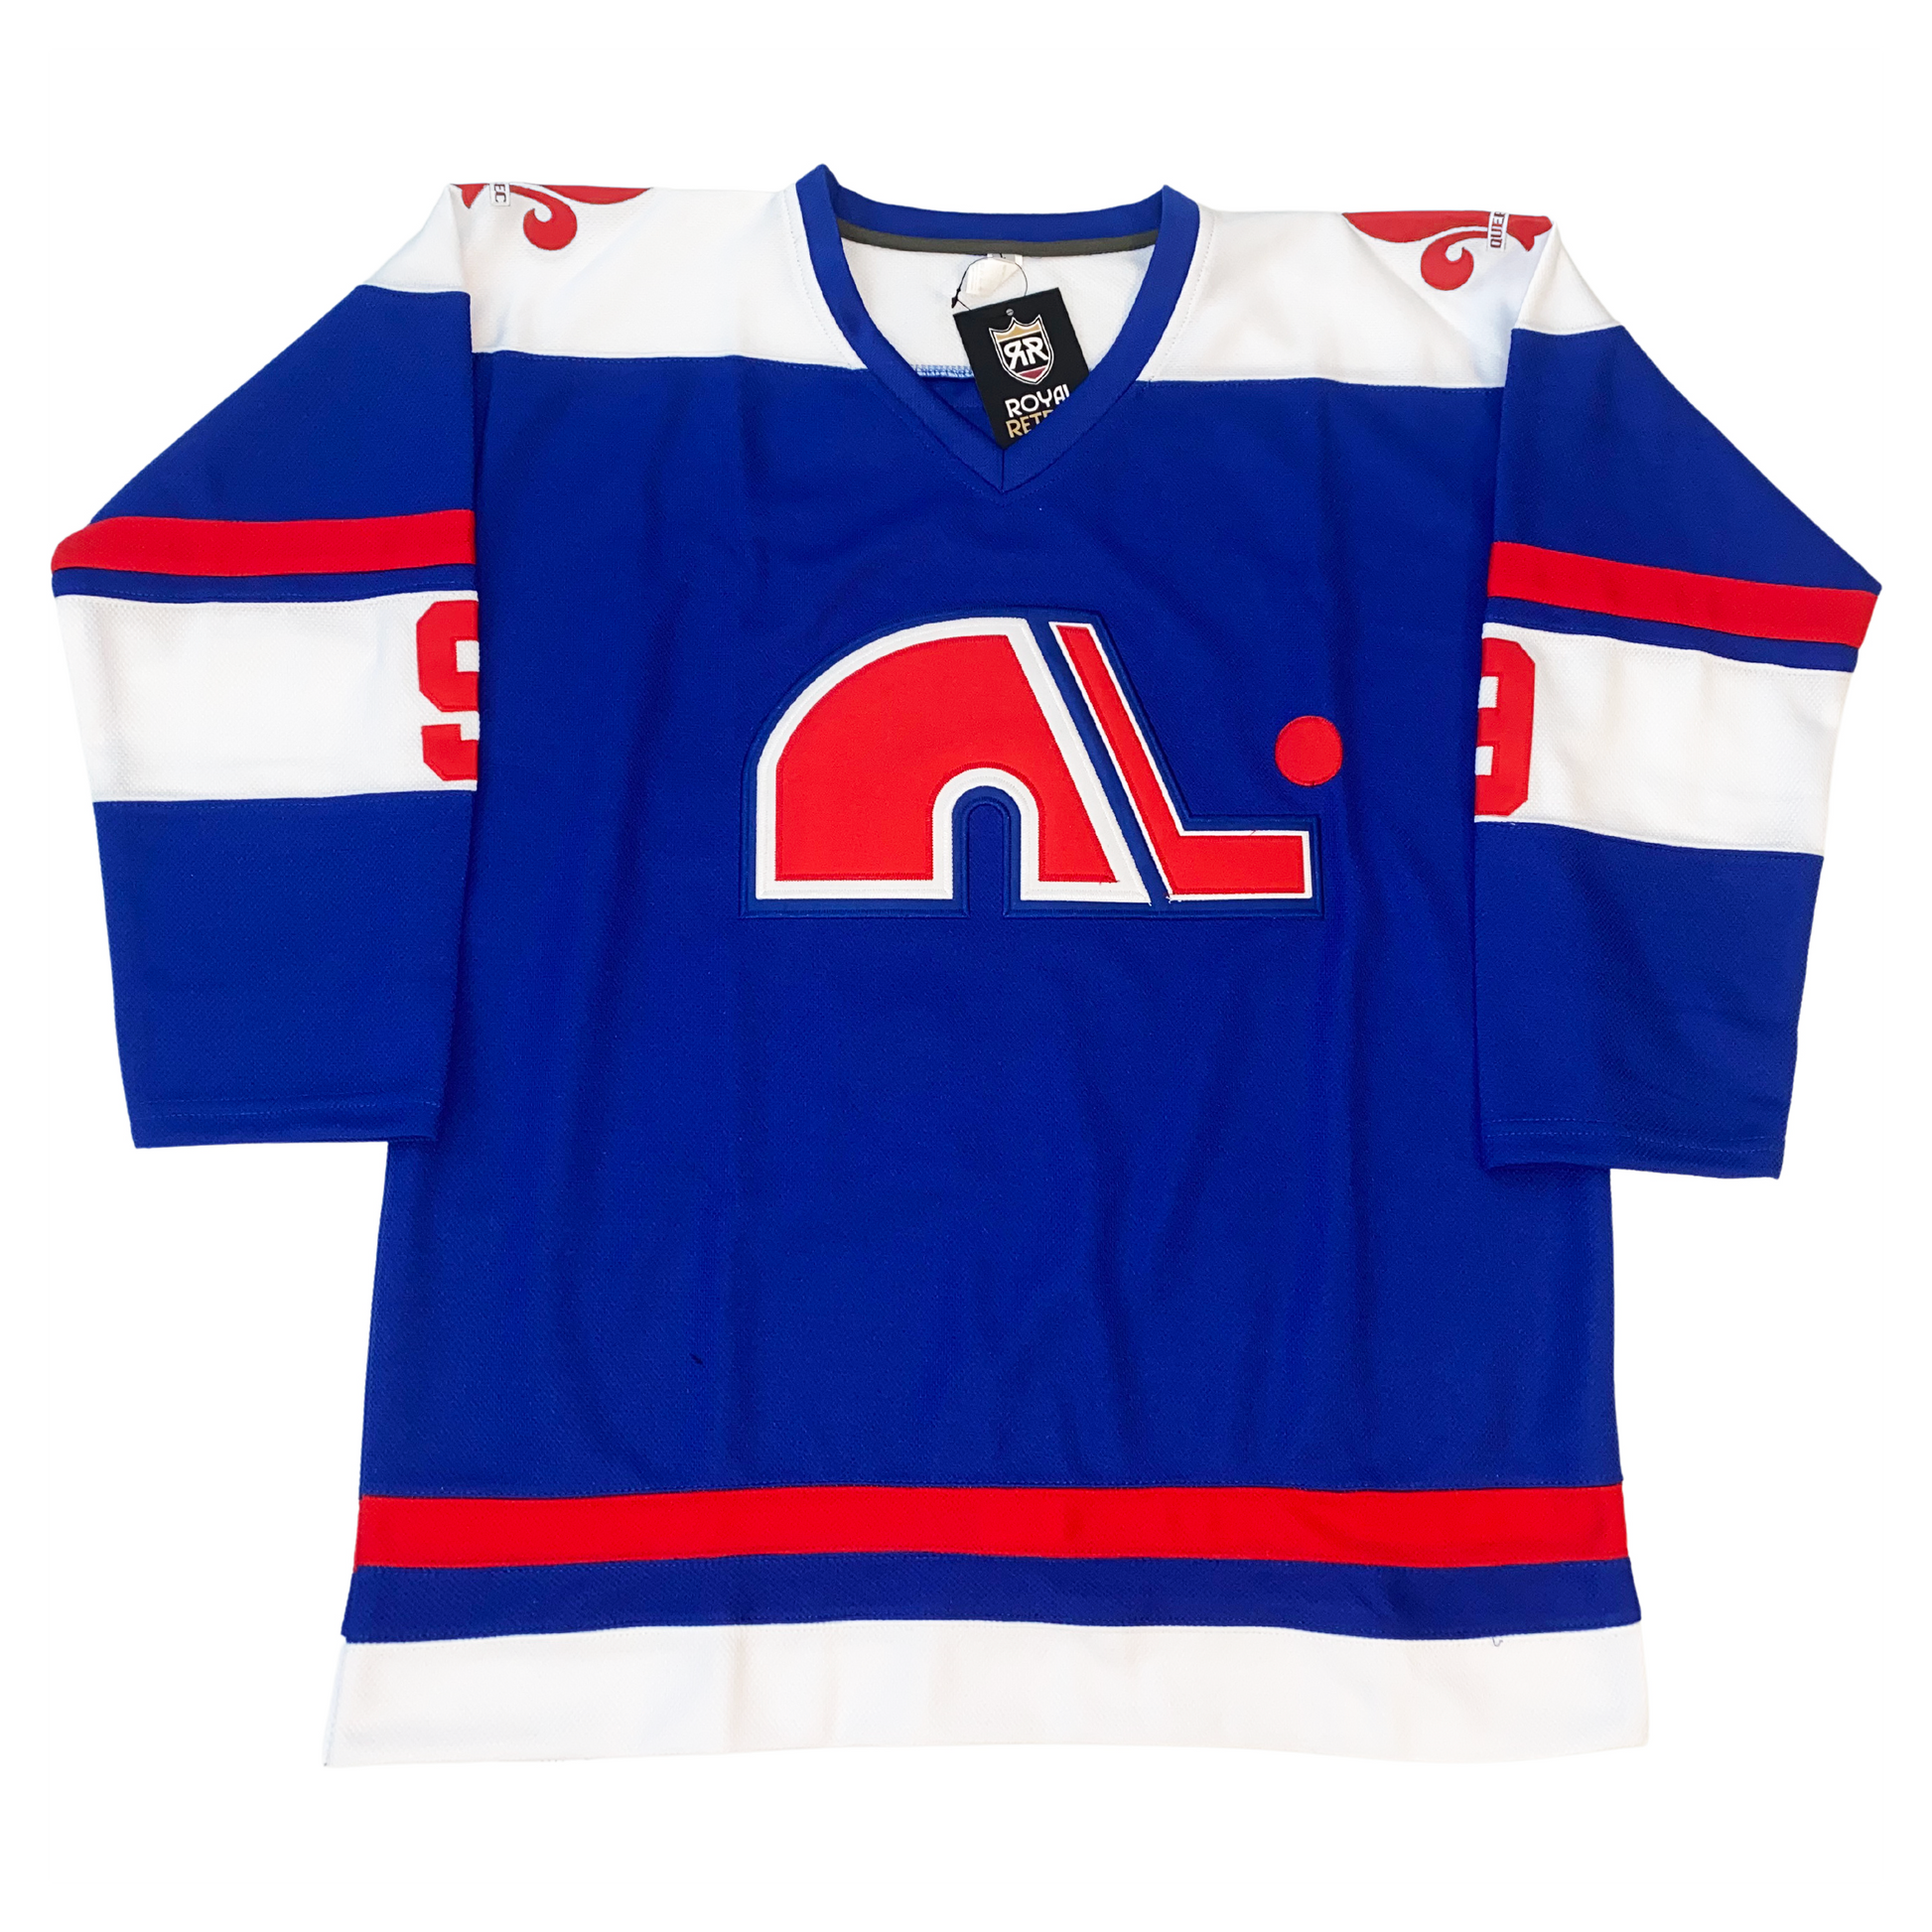 NHL Jerseys for sale in Montreal, Quebec